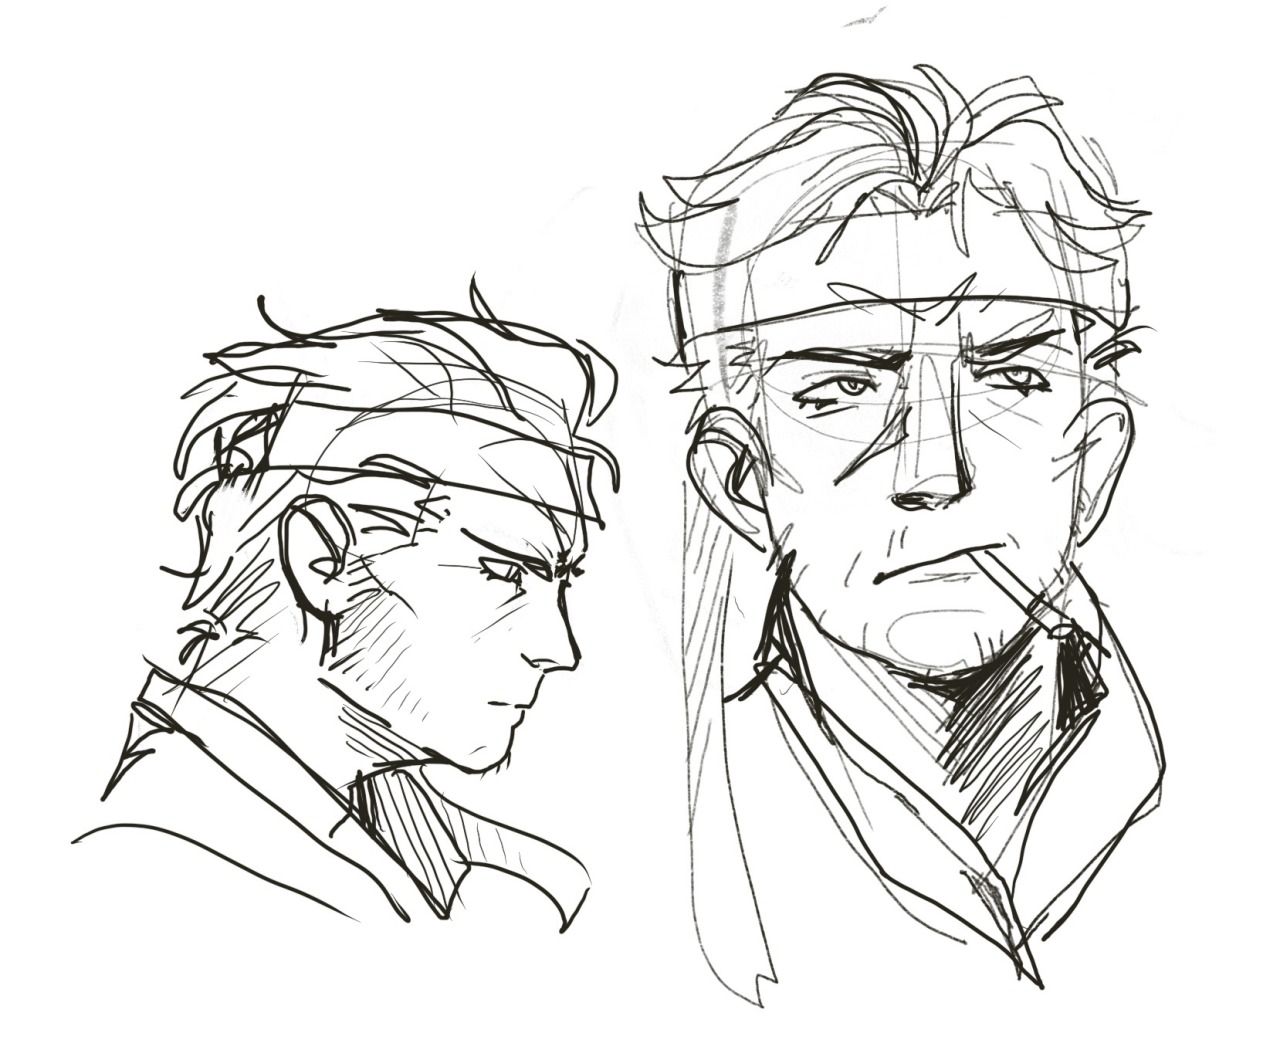 Sketches, studying Snake's face & trying to figure him out in my style